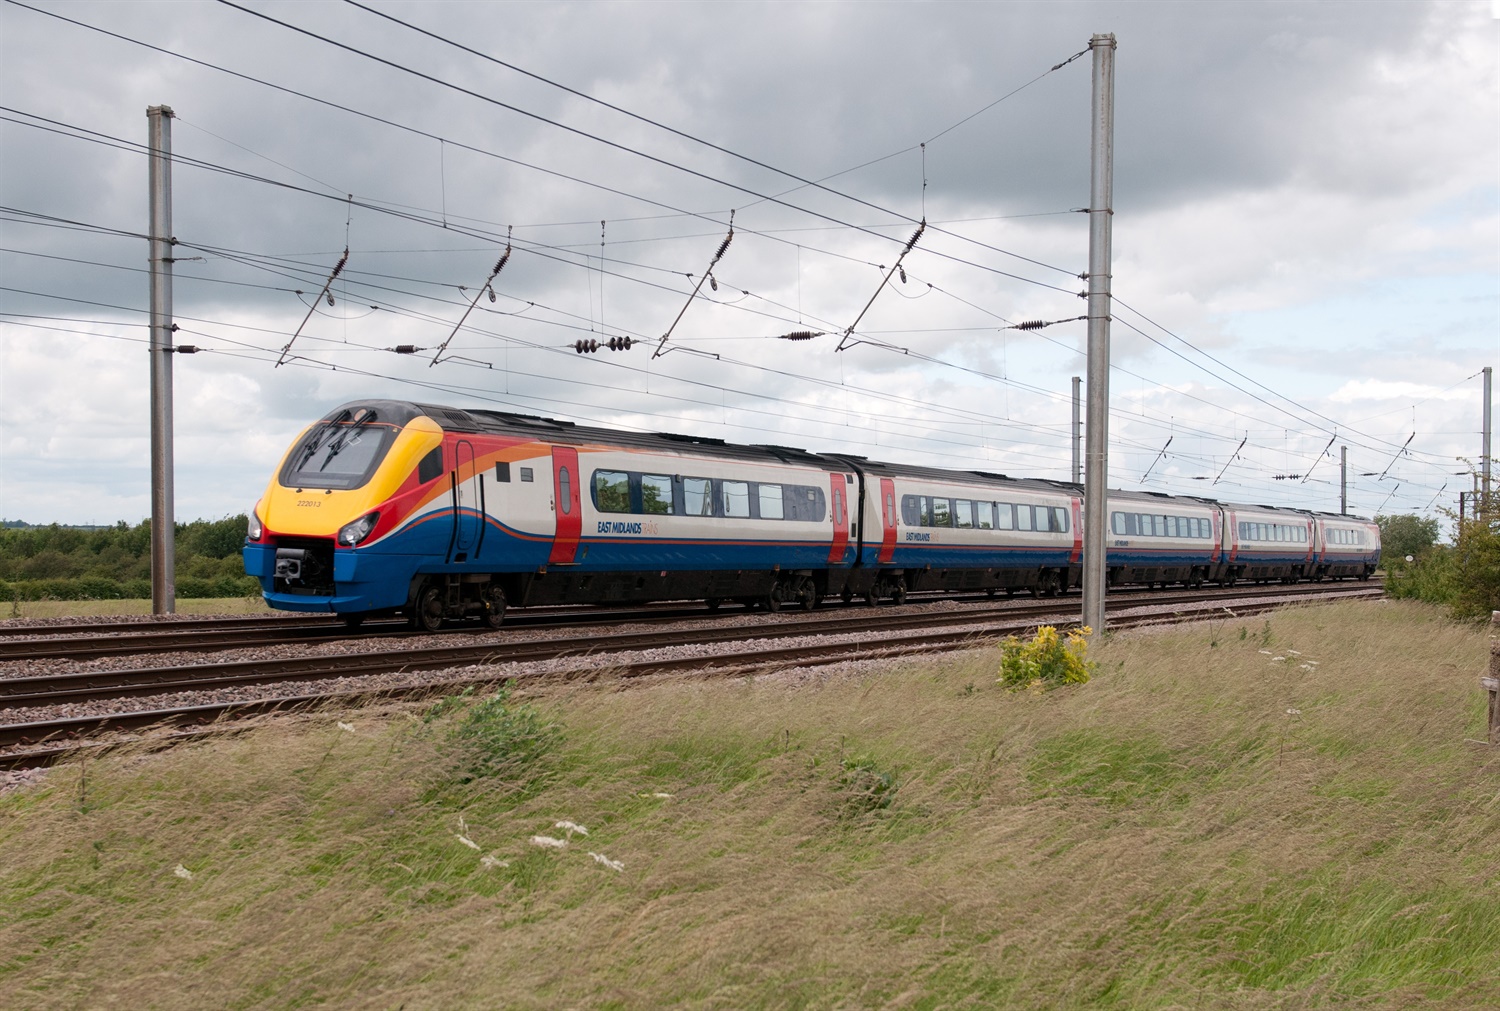 Ministers want freight on passenger rail to expand